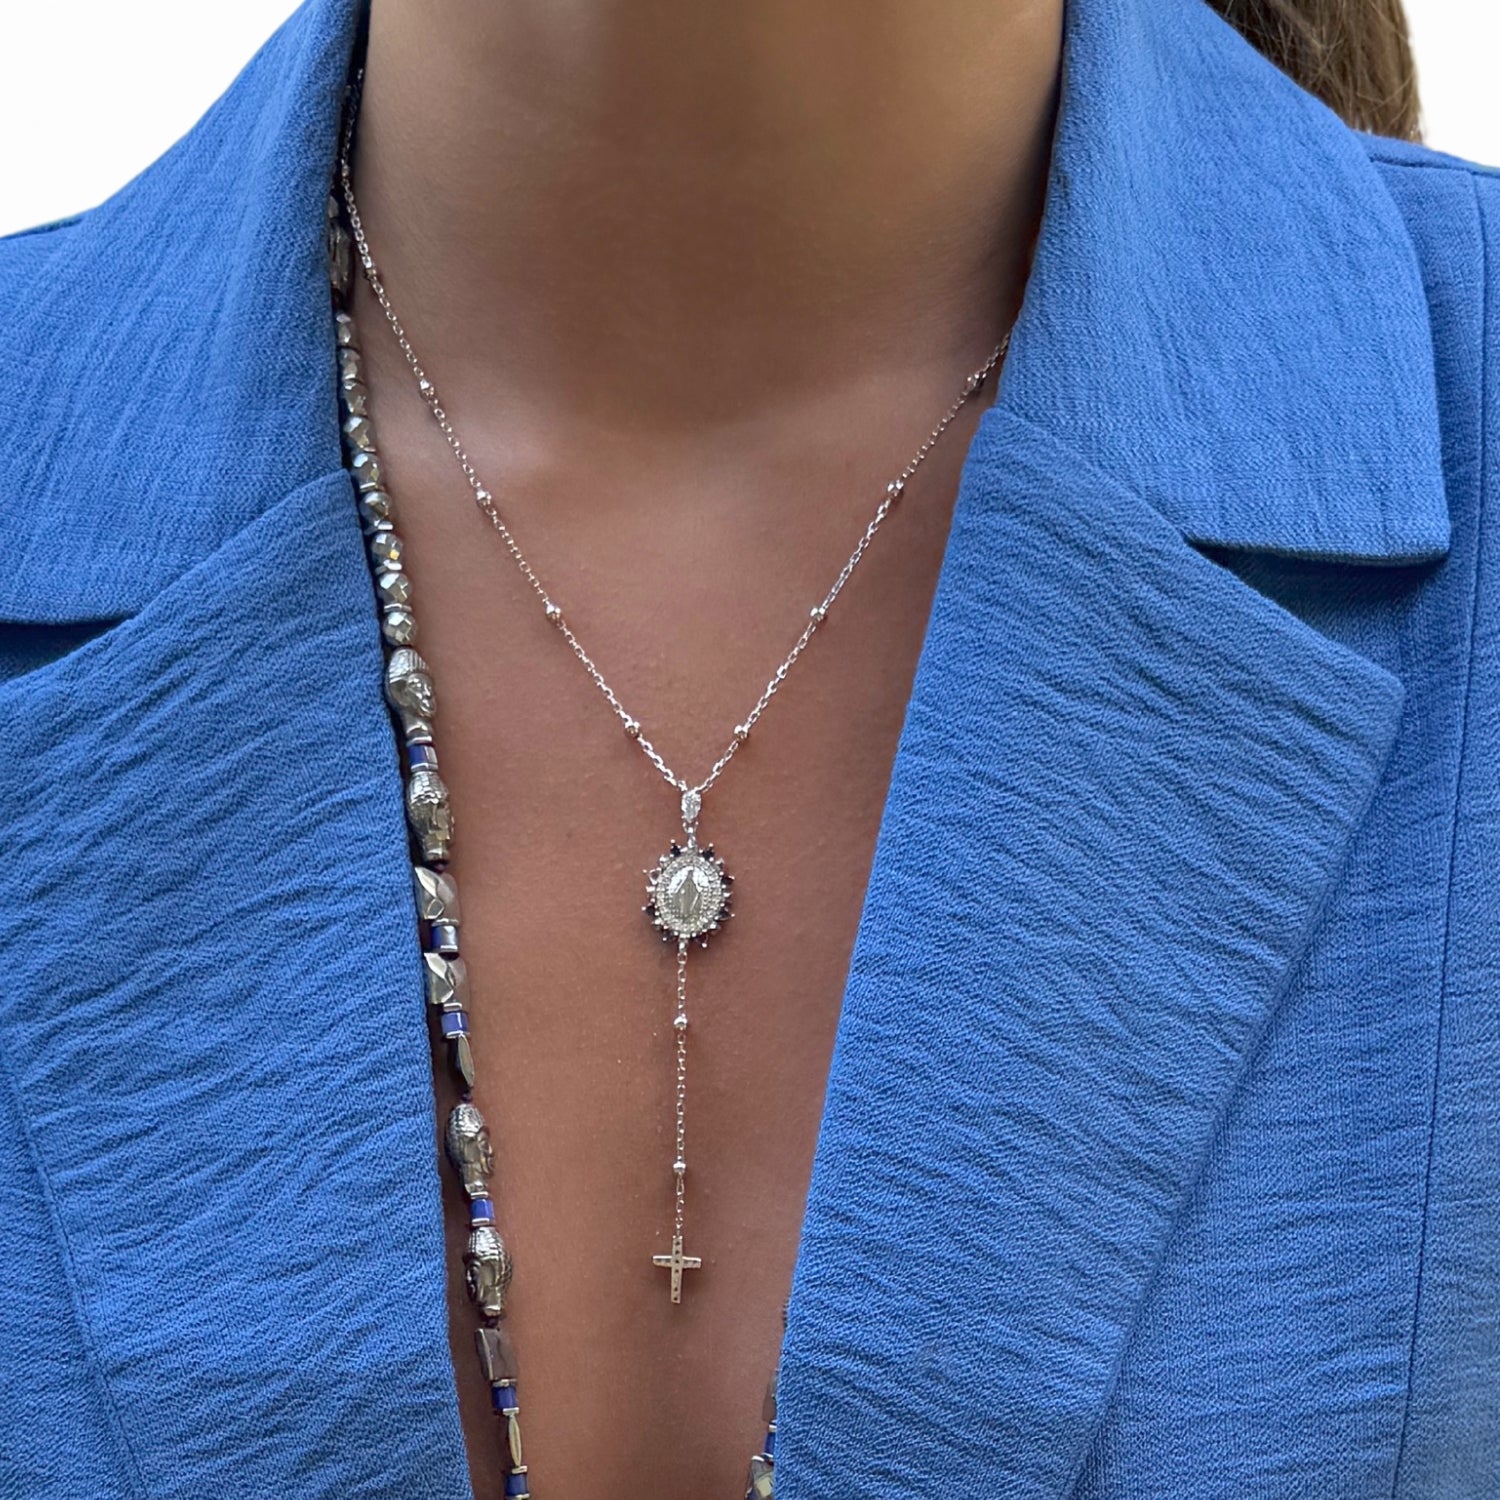 Model Wearing Handcrafted Virgin Mary Pendant Necklace with Sapphires and Diamonds